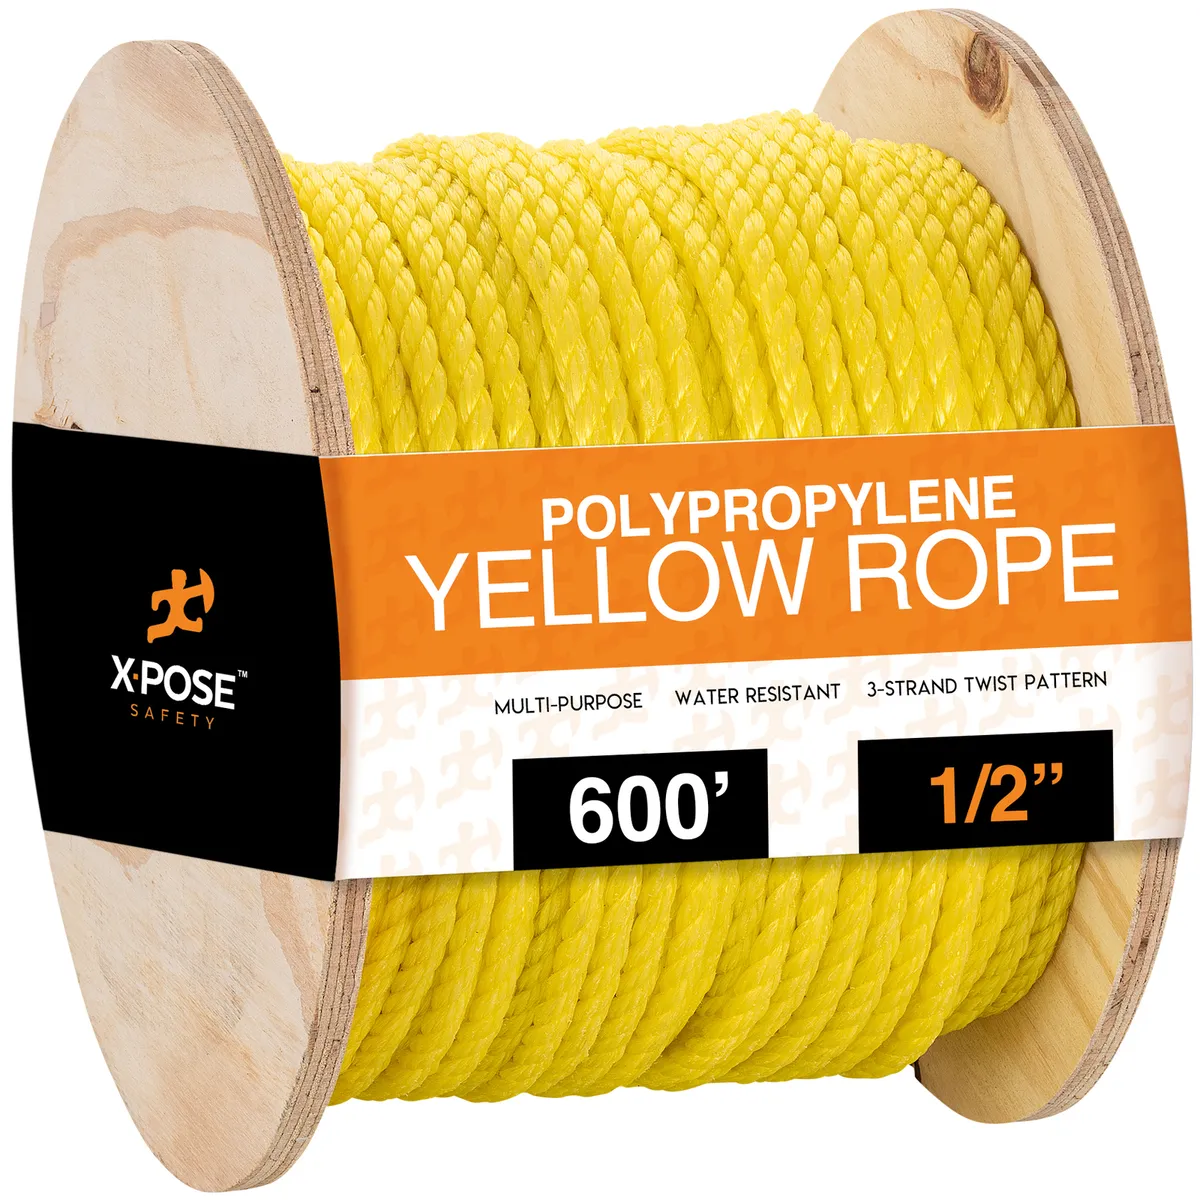 3/4 inch x 600' Twisted Yellow Poly Rope 3-Strand Polypropylene Braided Safety Anchor Line Climbing Rope